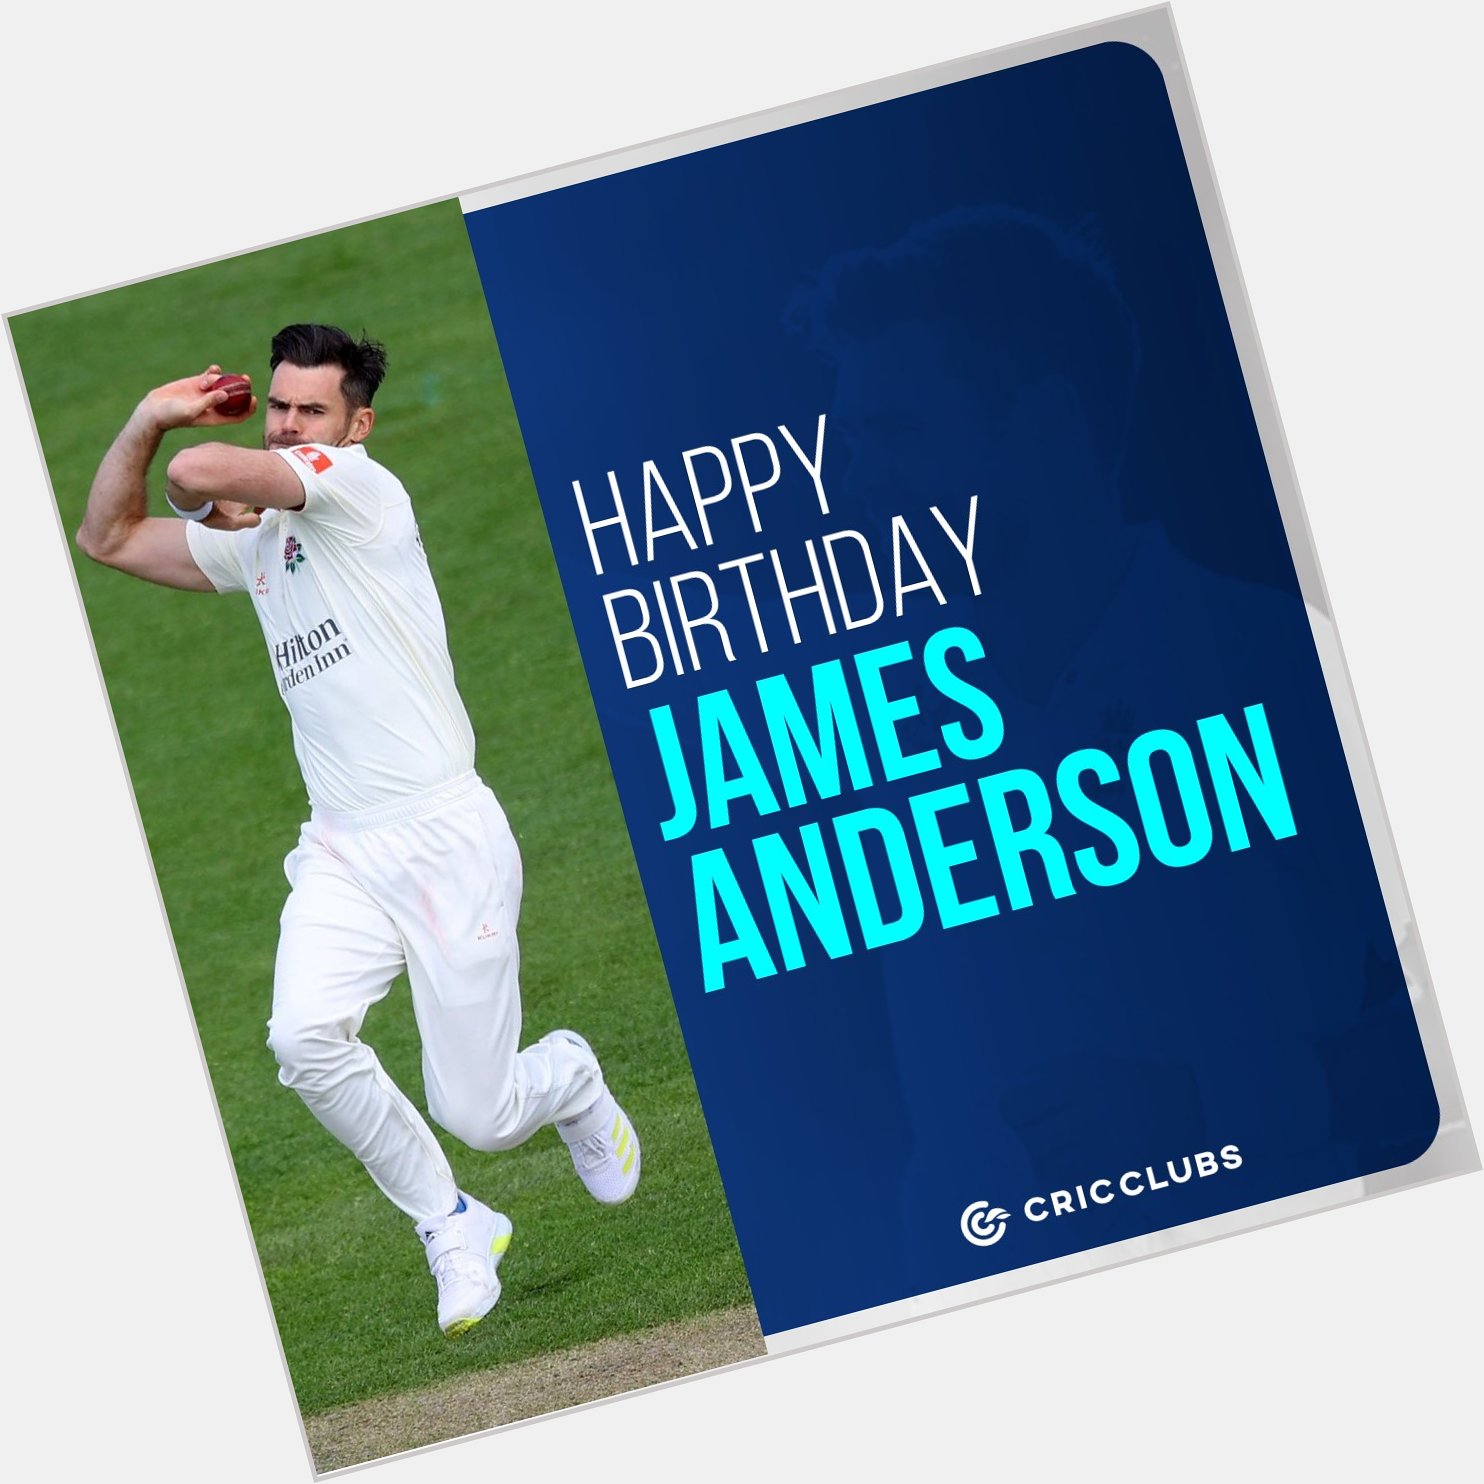 Wishing king of swing James Anderson a very happy birthday.    